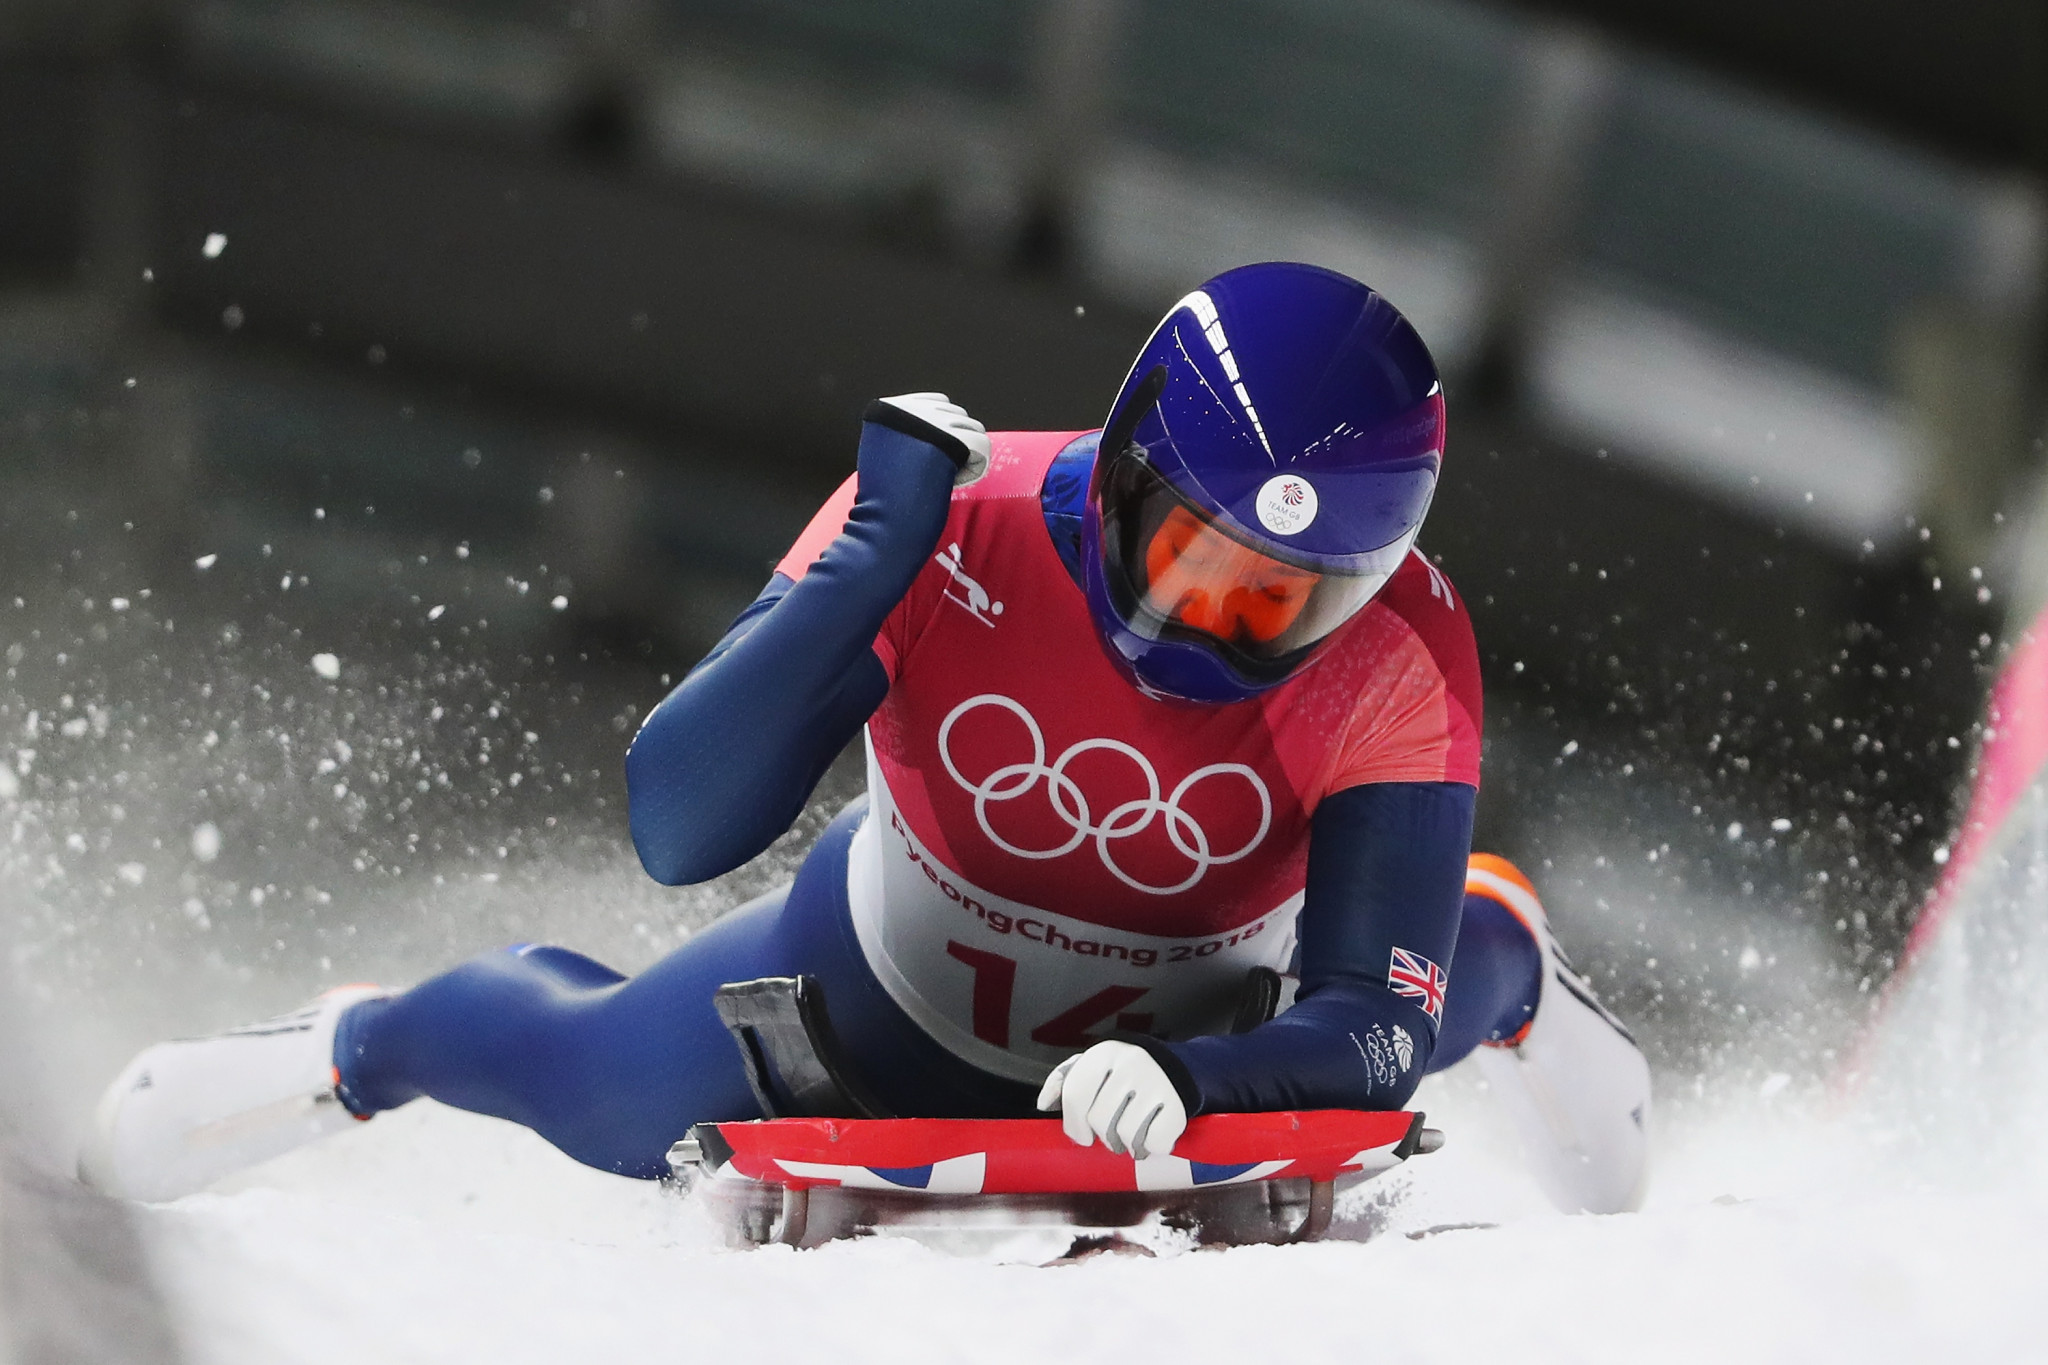 Lizzy Yarnold successfully defended her women's skeleton Olympic title at Pyeongchang 2018 ©Getty Images